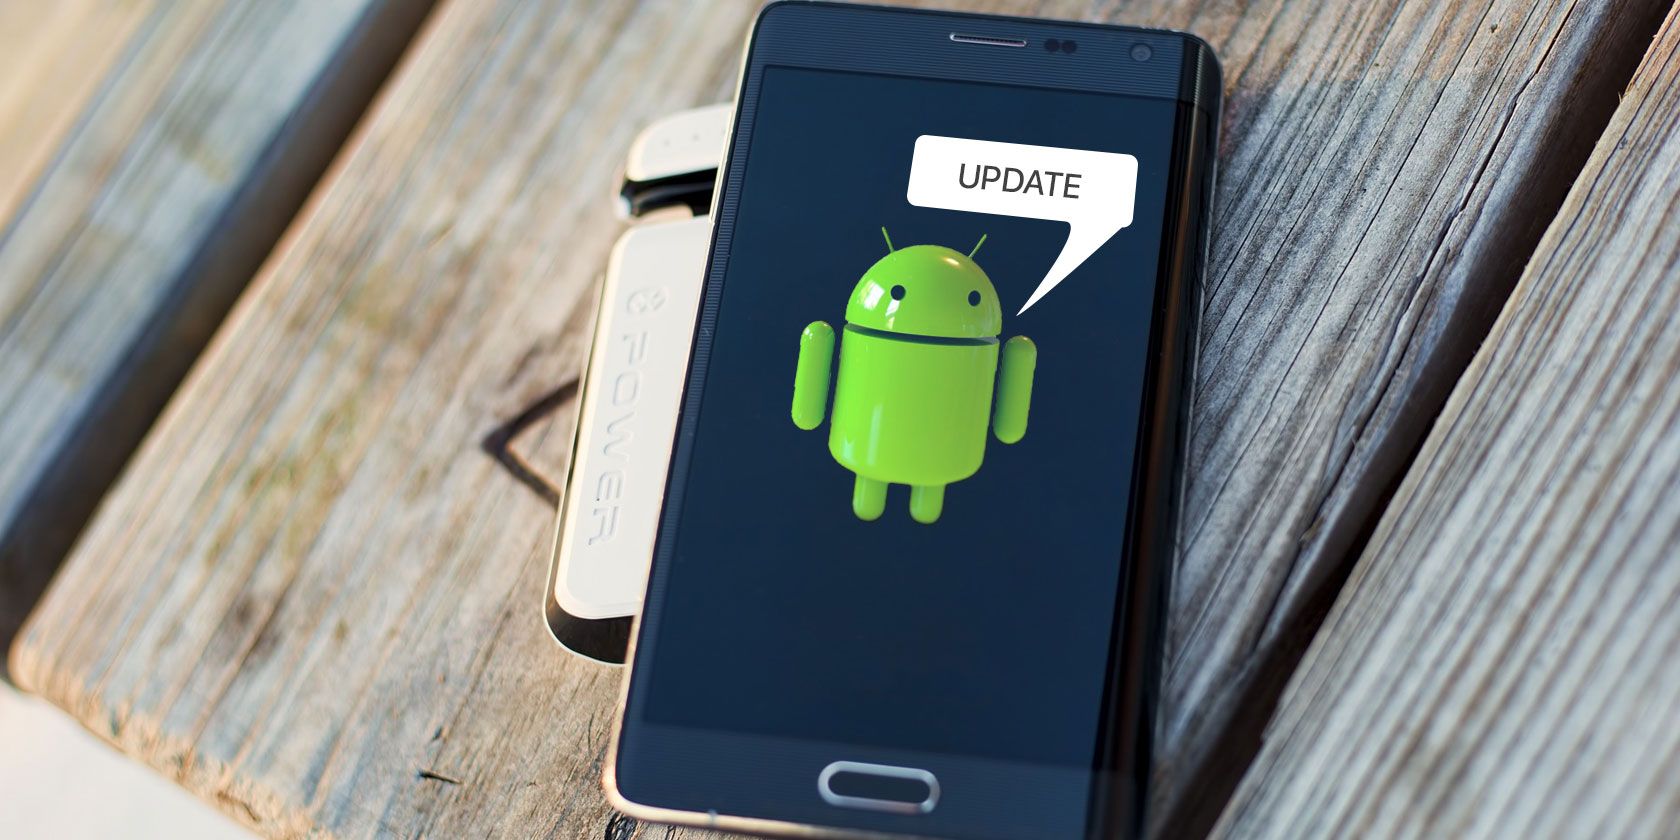 How to Ensure Your Android Phone Is Up-to-Date and Secure